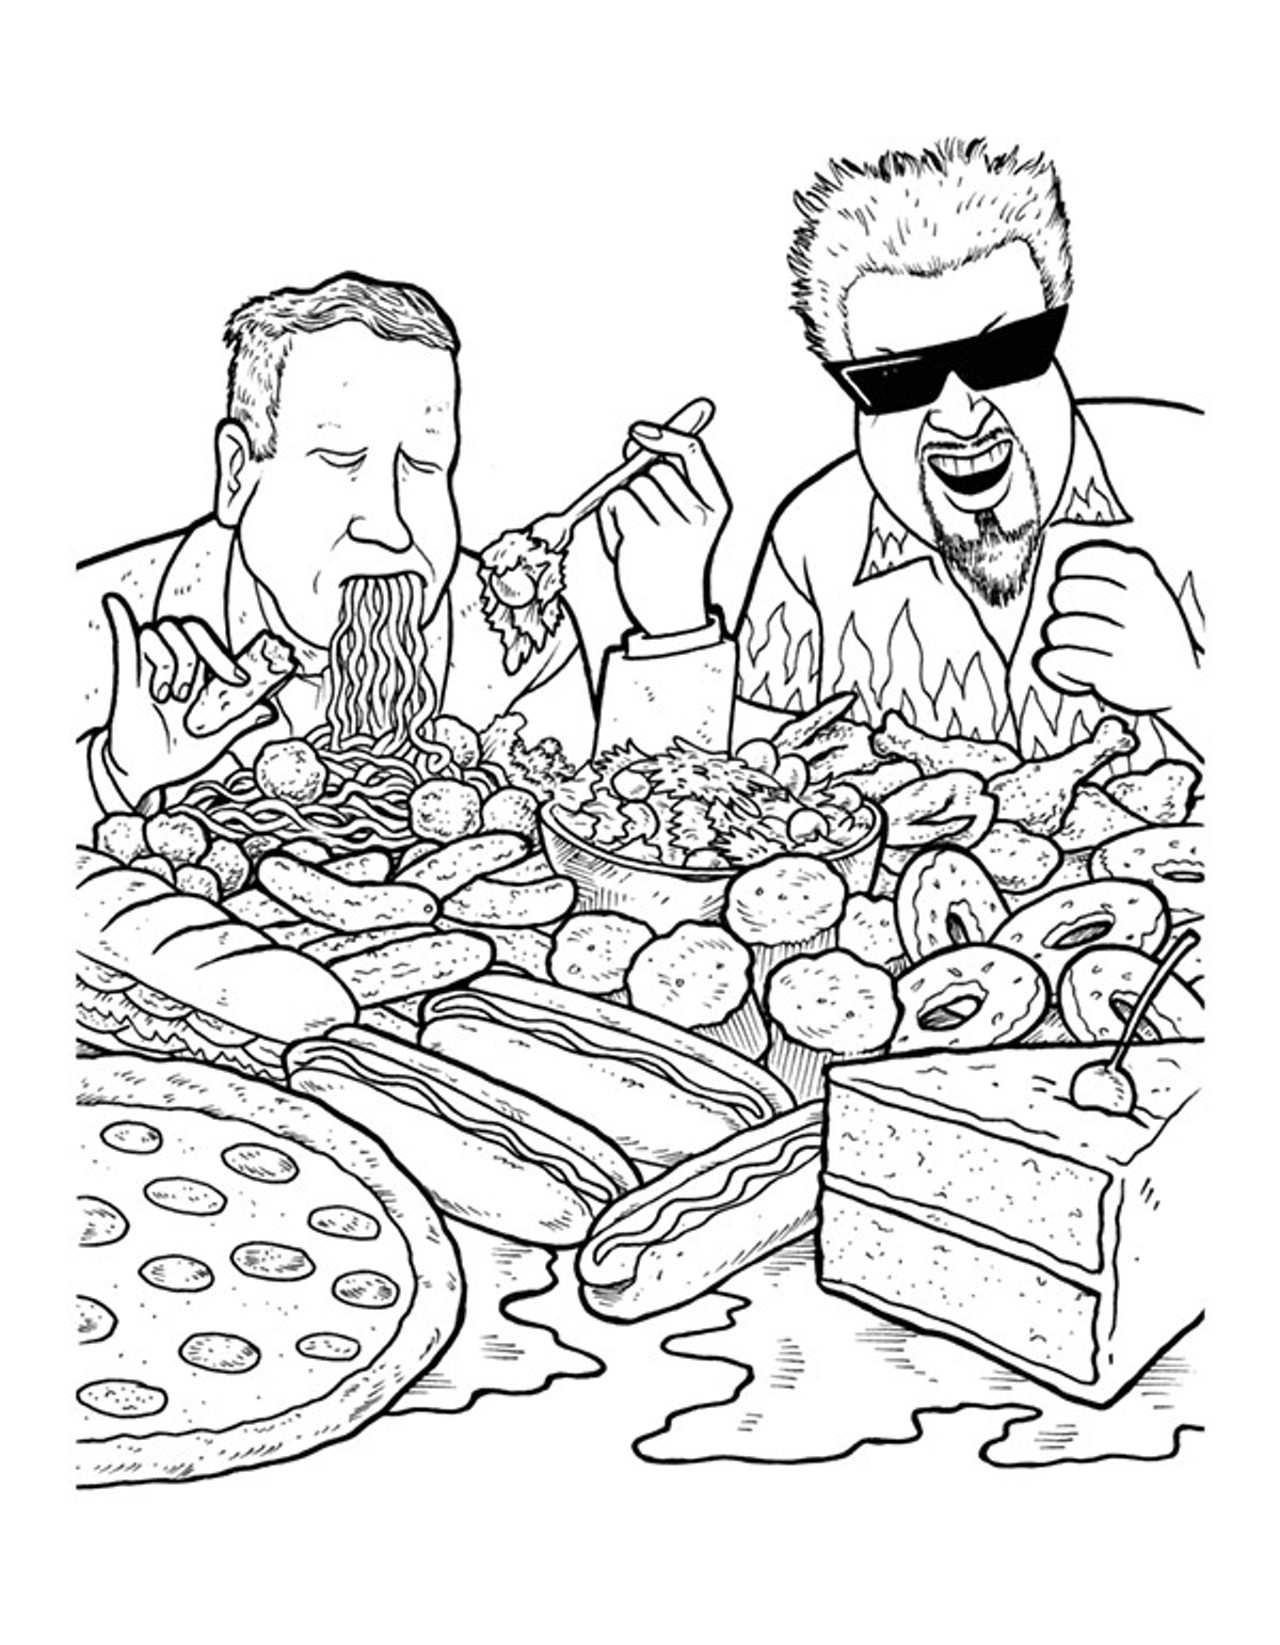 Ohio Governor John Kasich and Guy Fieri bond over Cleveland eats.